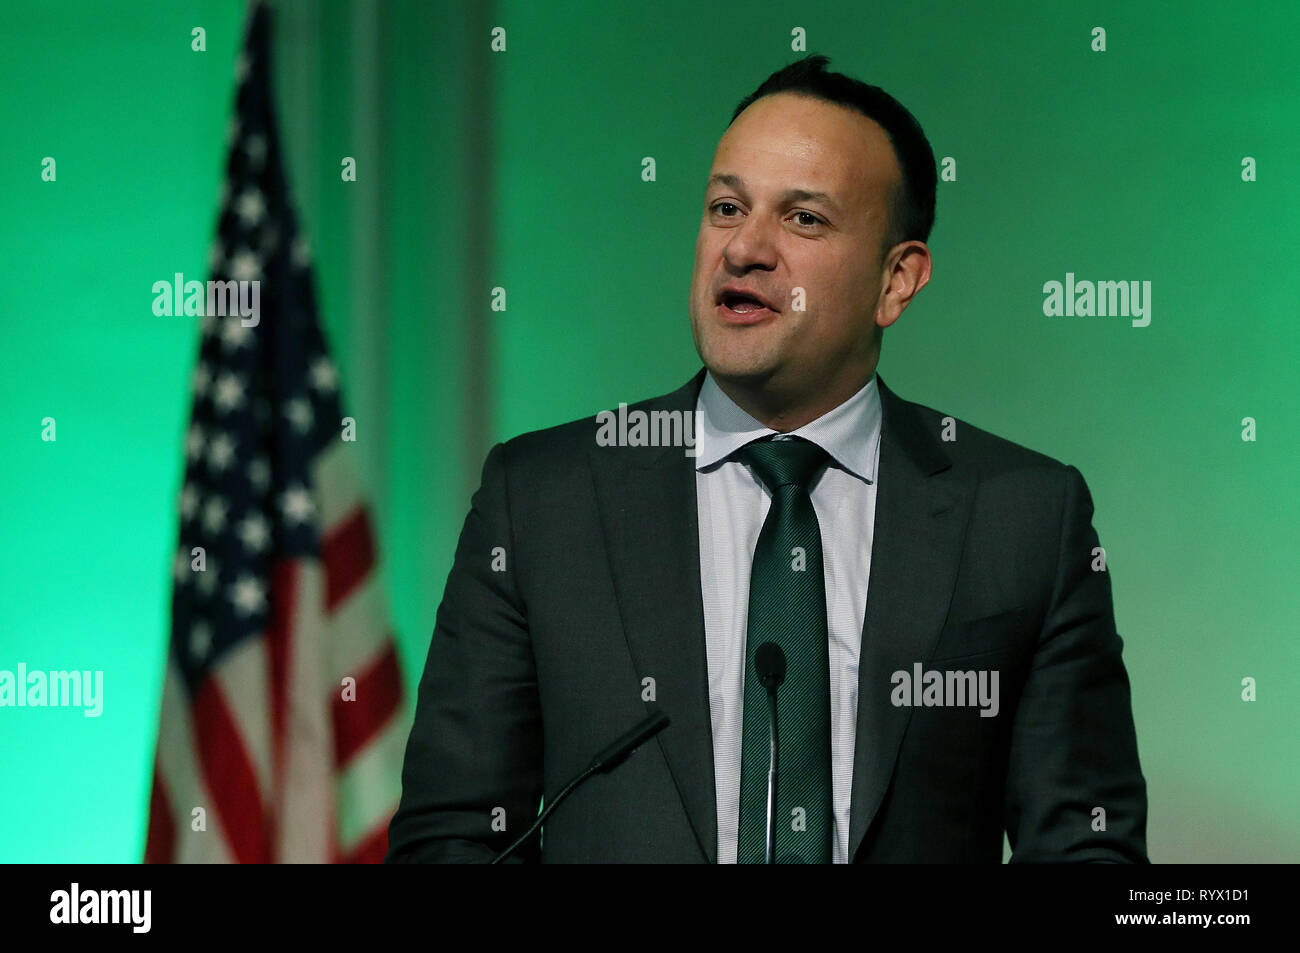 Taoiseach Leo Varadkar speaking at the Irish Fellowship Club Annual SPD Dinner at the Hilton Hotel, Chicago, as he continues his visit to the United States. Stock Photo